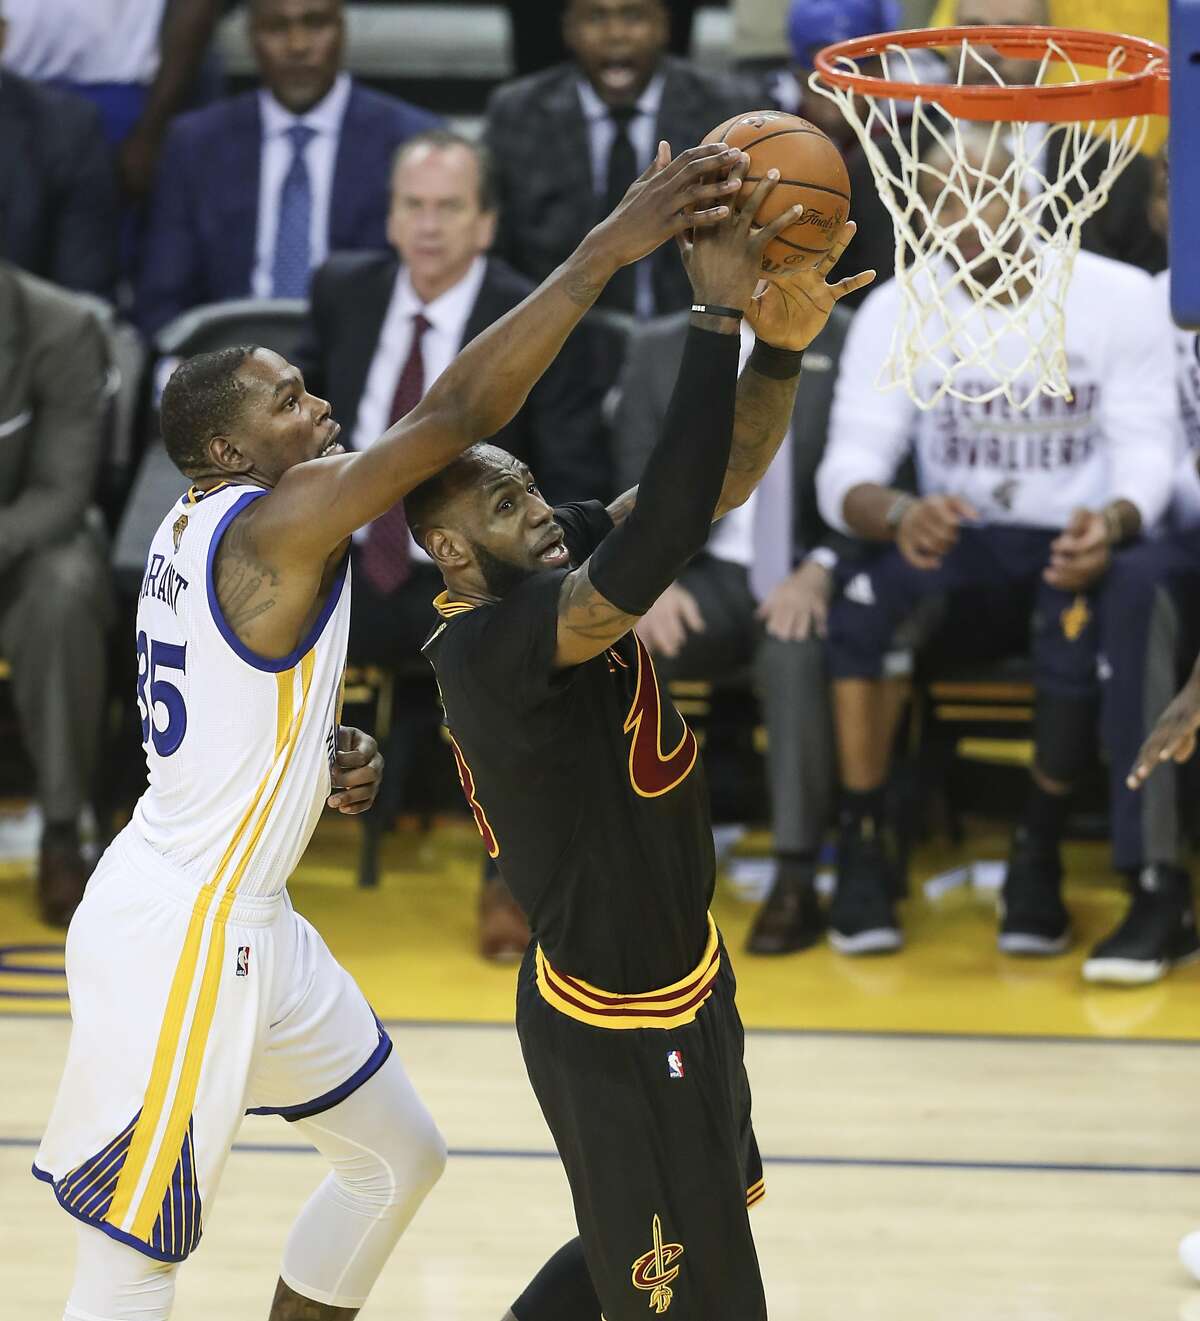 Golden State Warriors' Kevin Durant tries to stop Cleveland Cavaliers' LeBron James in the second quarter during Game 2 of the 2017 NBA Finals at Oracle Arena on Sunday, June 4, 2017 in Oakland, Calif.